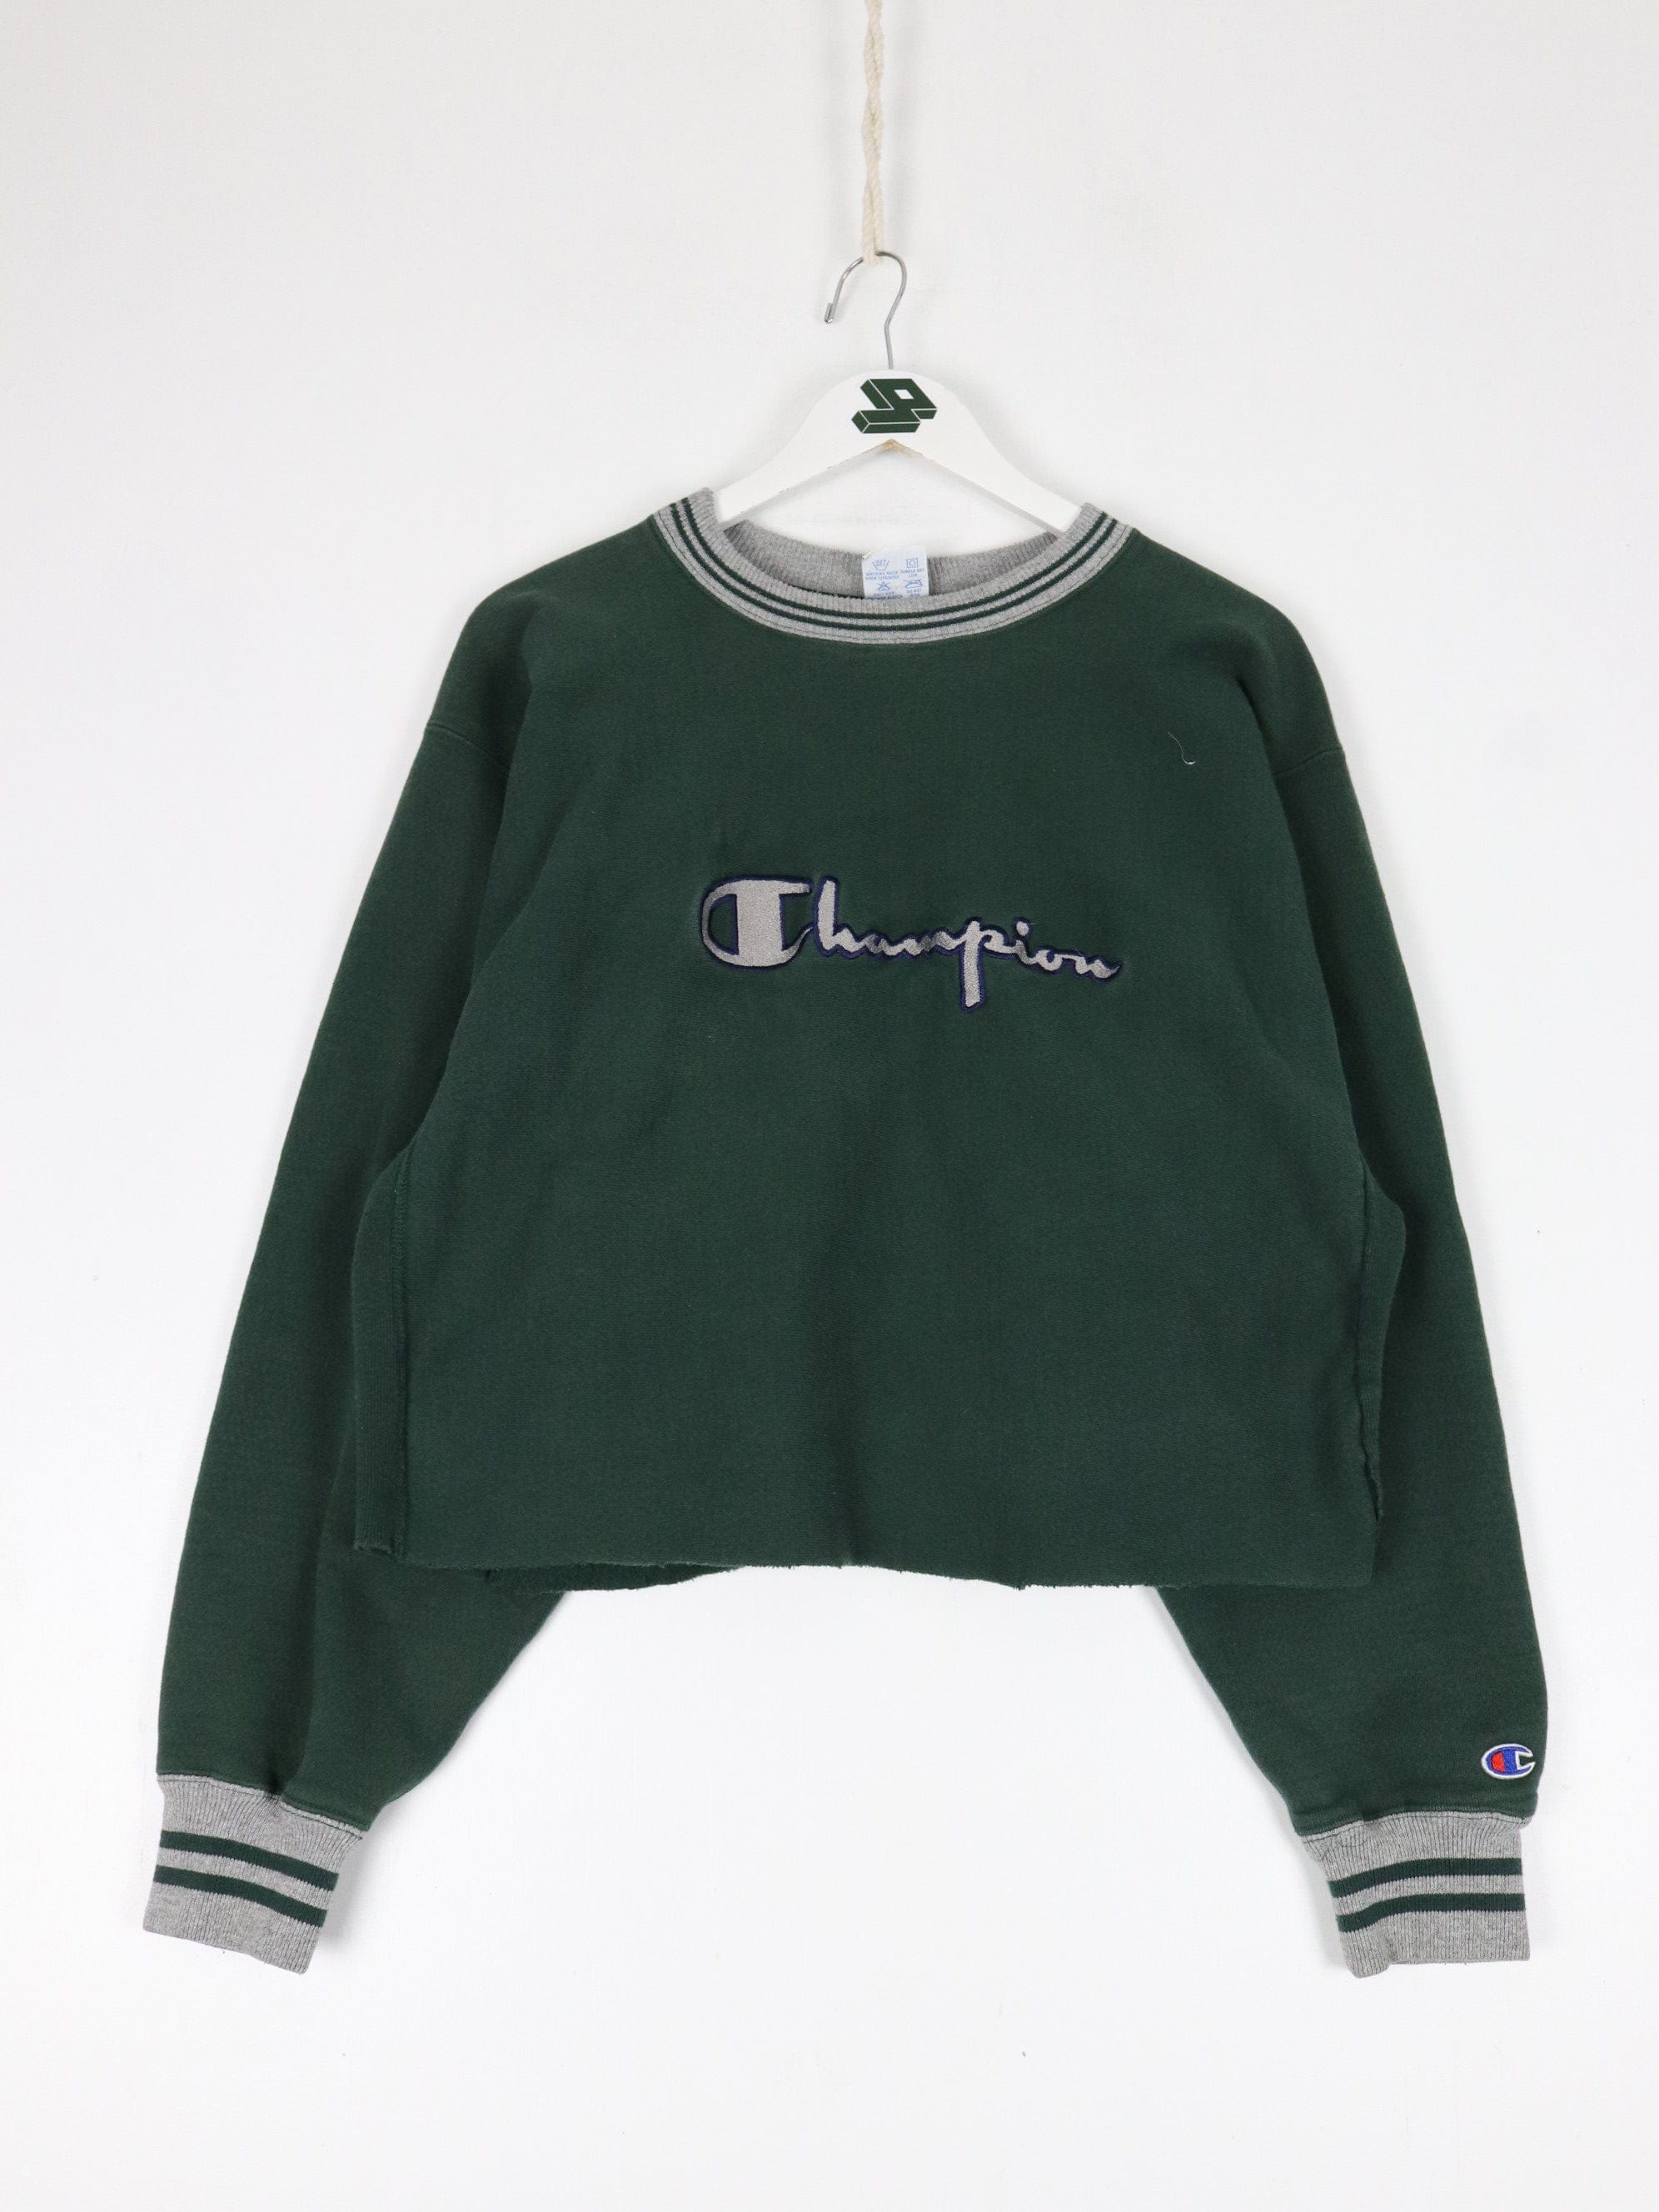 Vintage Champion Sweatshirt Fits Adult Cropped XL Green Reverse Weave 90s